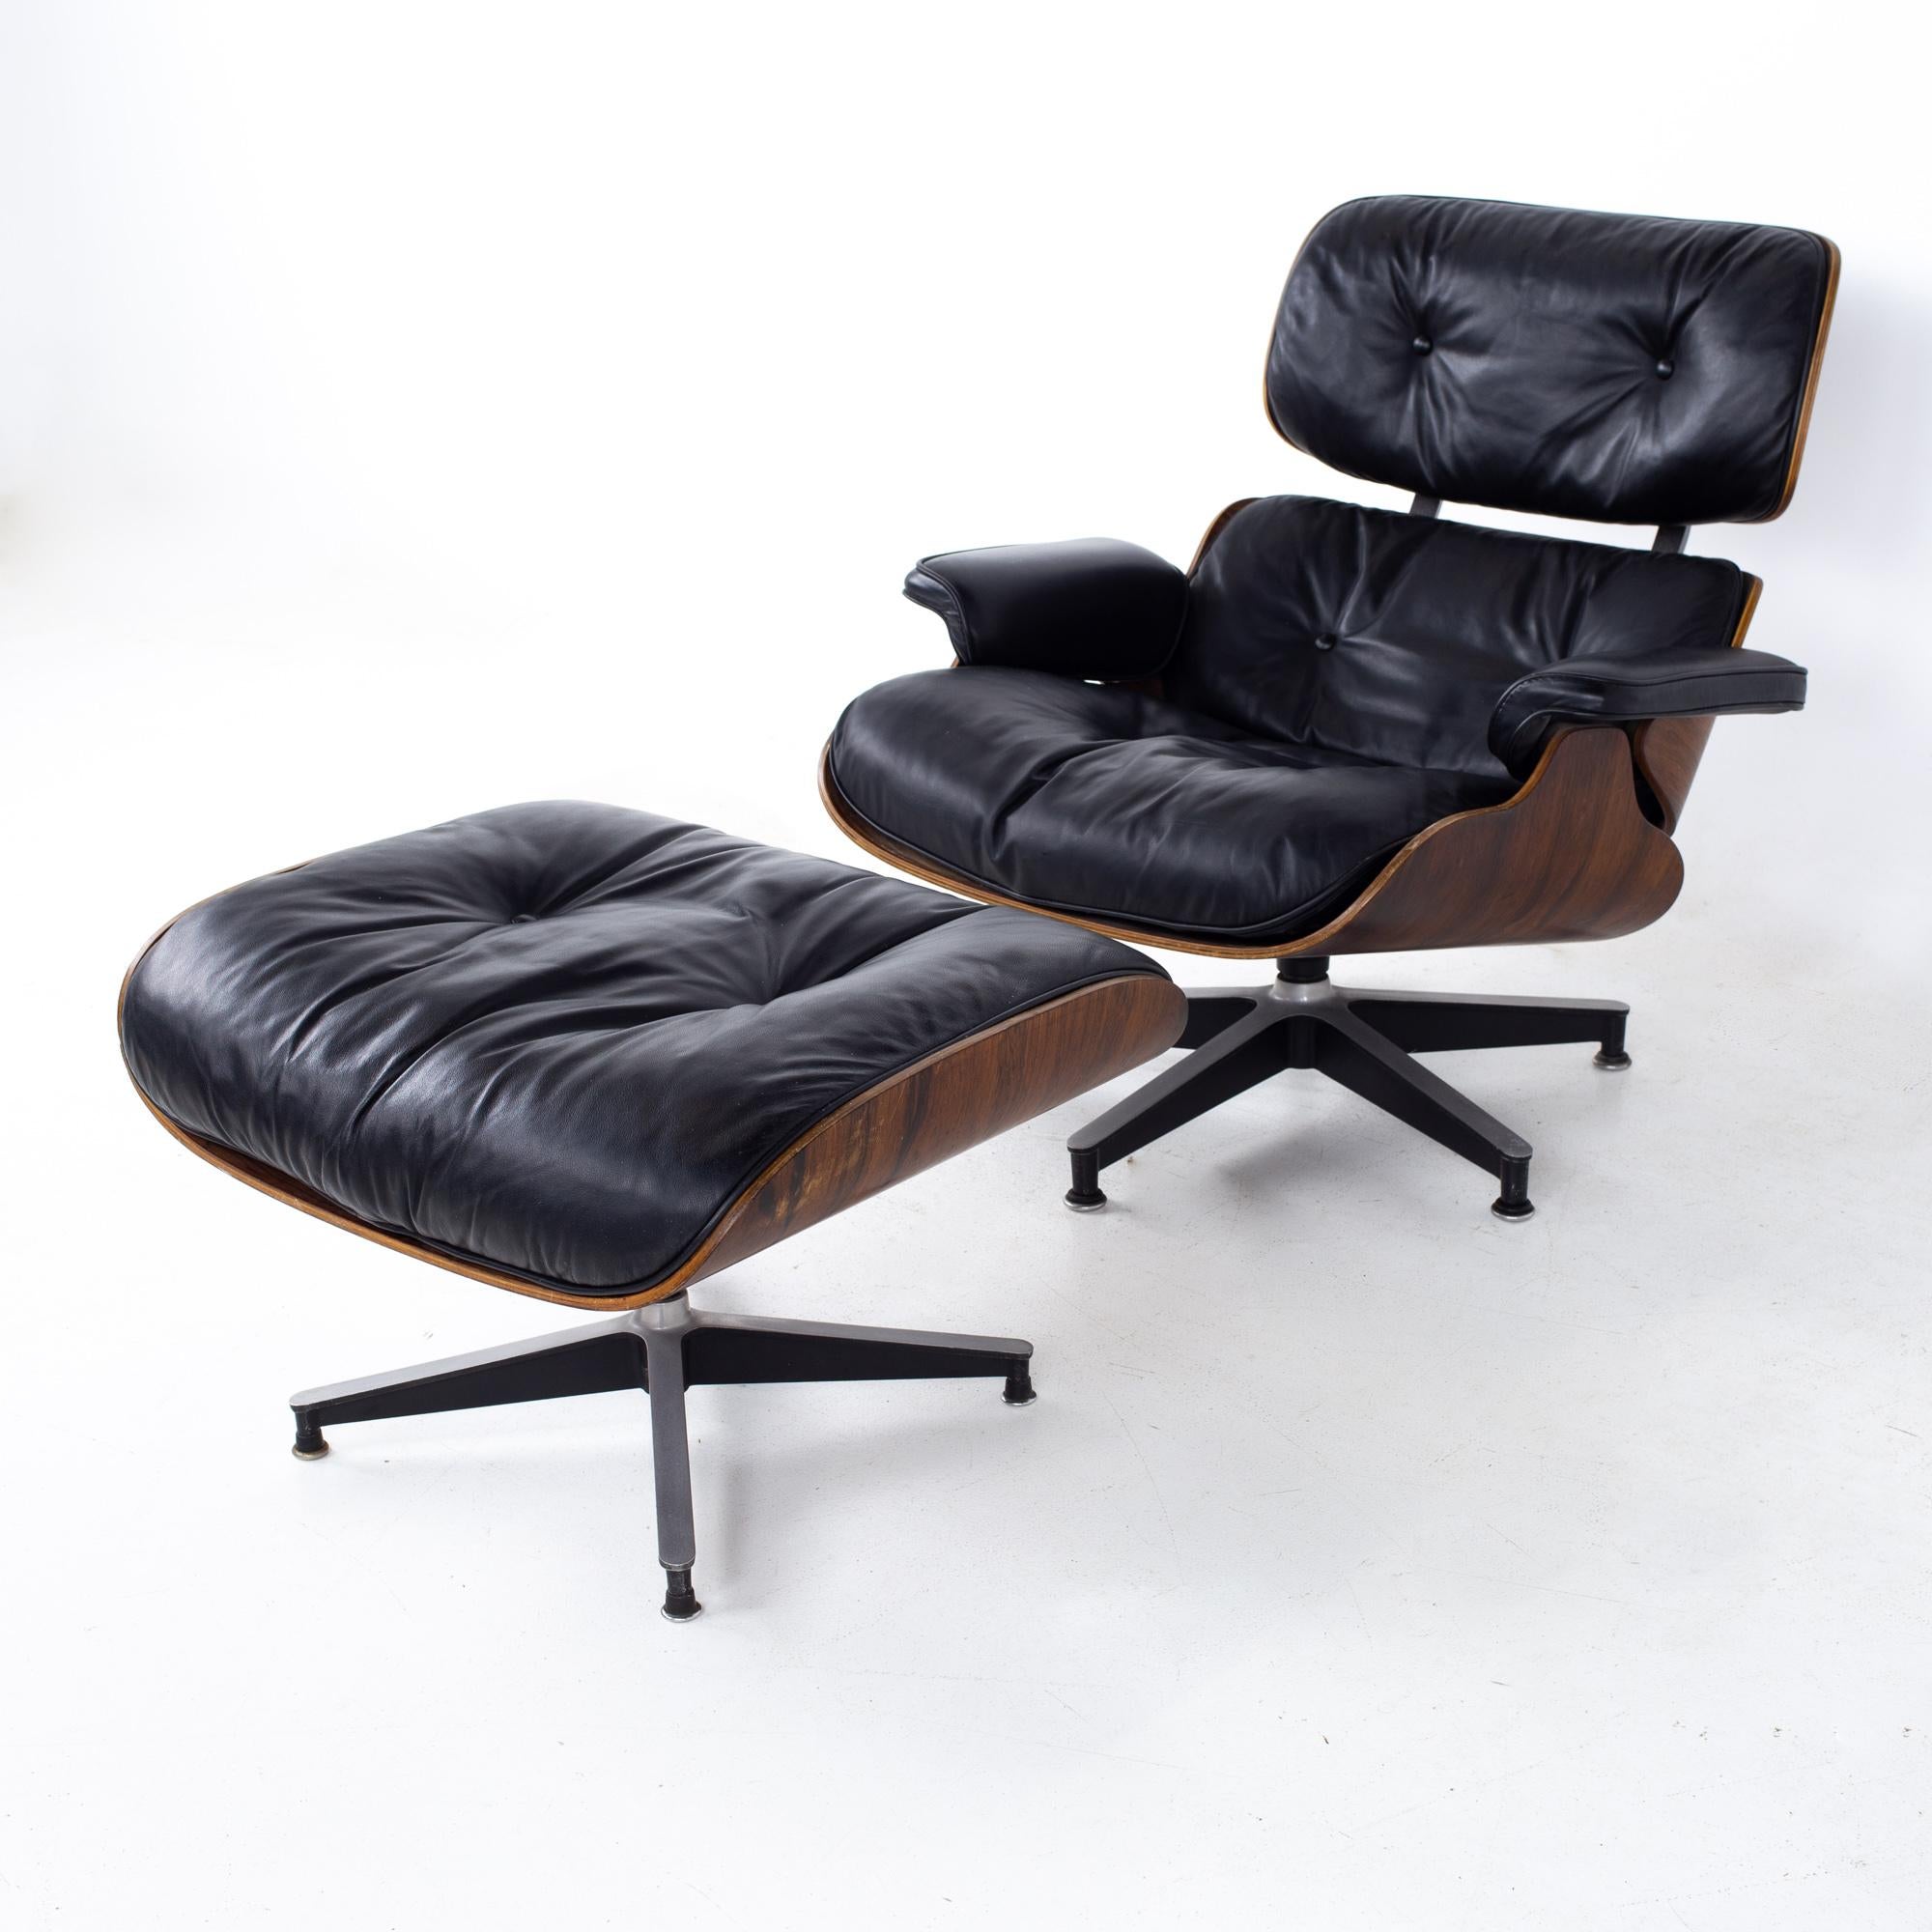 Eames mid century lounge chair and ottoman
Chair measures: 33 wide x 33 deep x 32 high, with a seat height of 17 inches and arm height of 19 inches 
Ottoman measures: 26 wide x 23 deep x 16 inches high

All pieces of furniture can be had in what